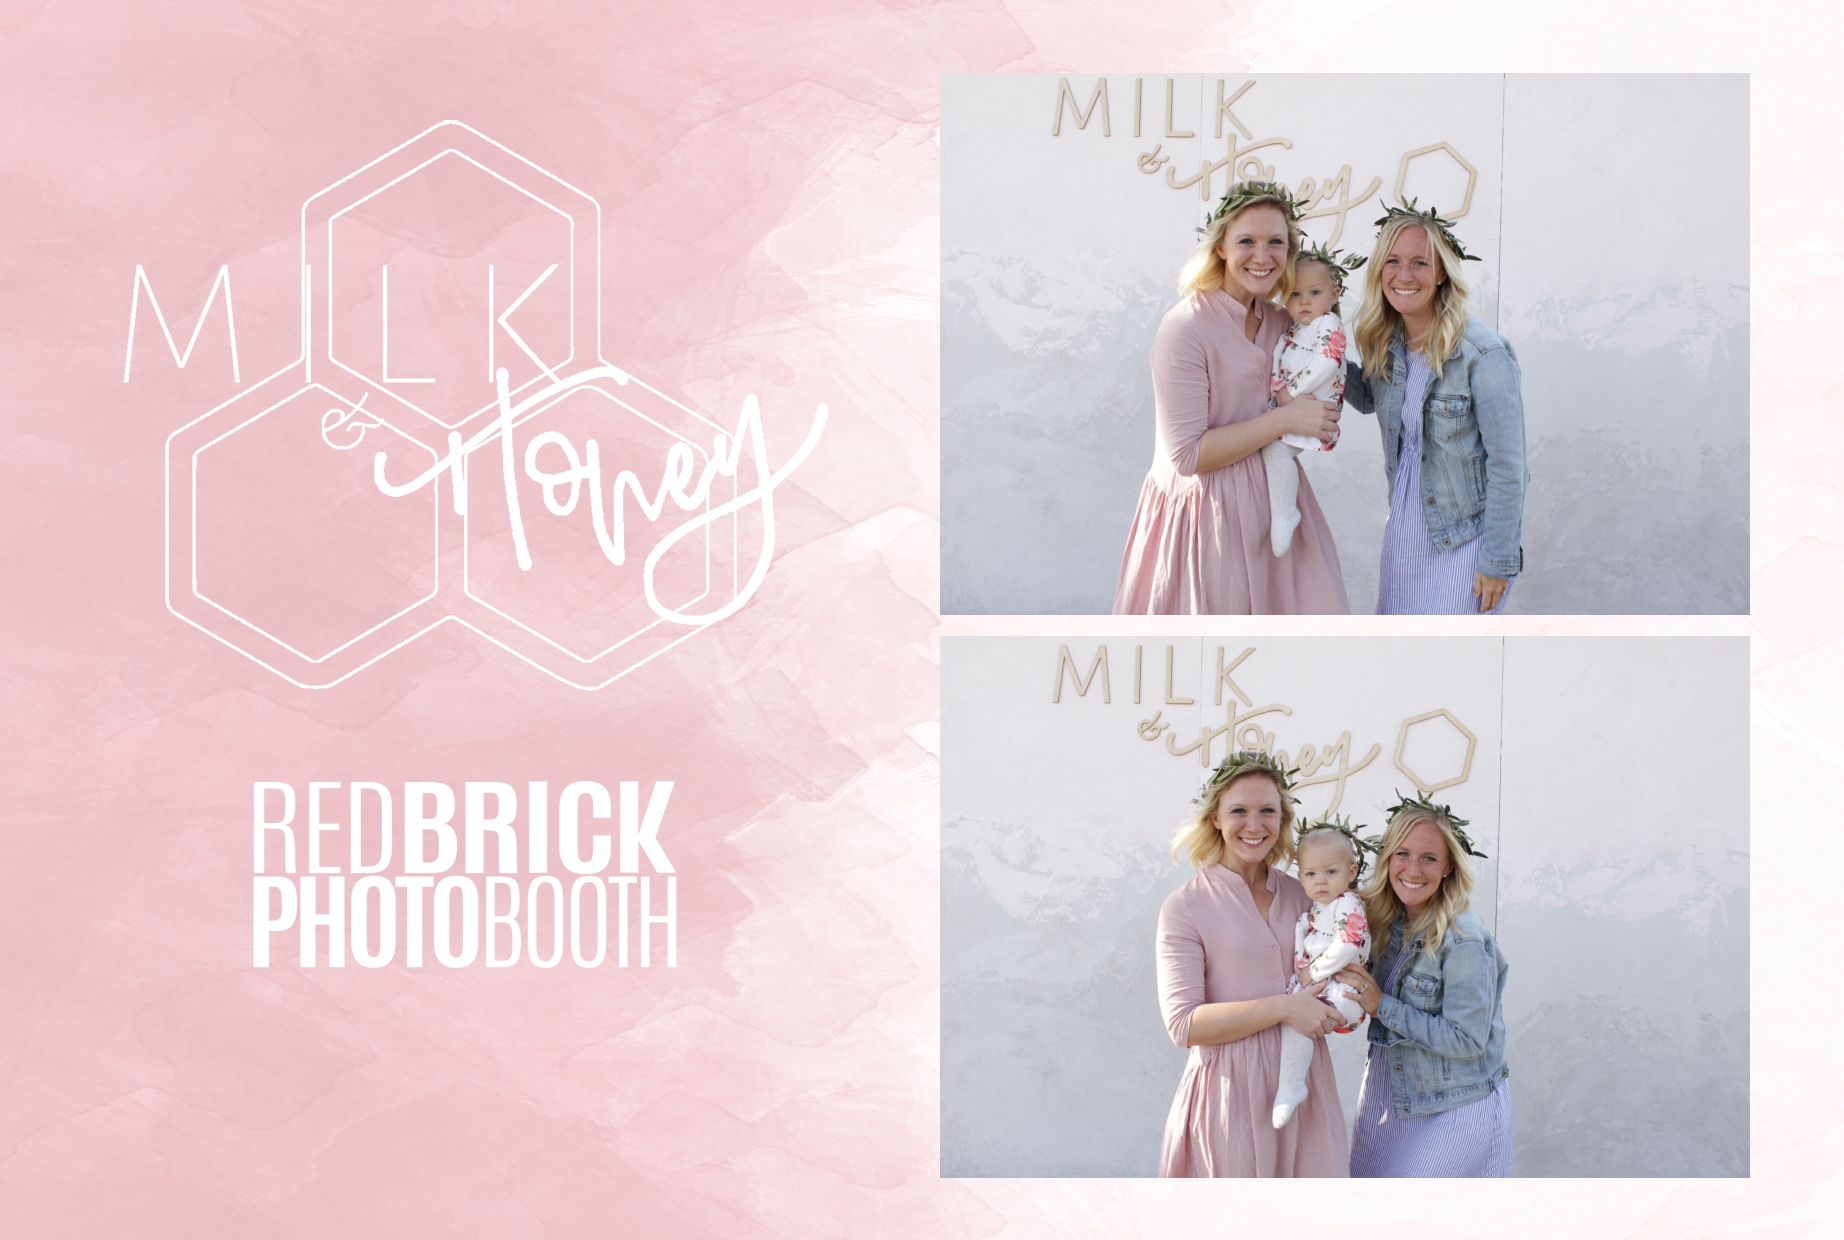 sister take photo together at milk and honey event